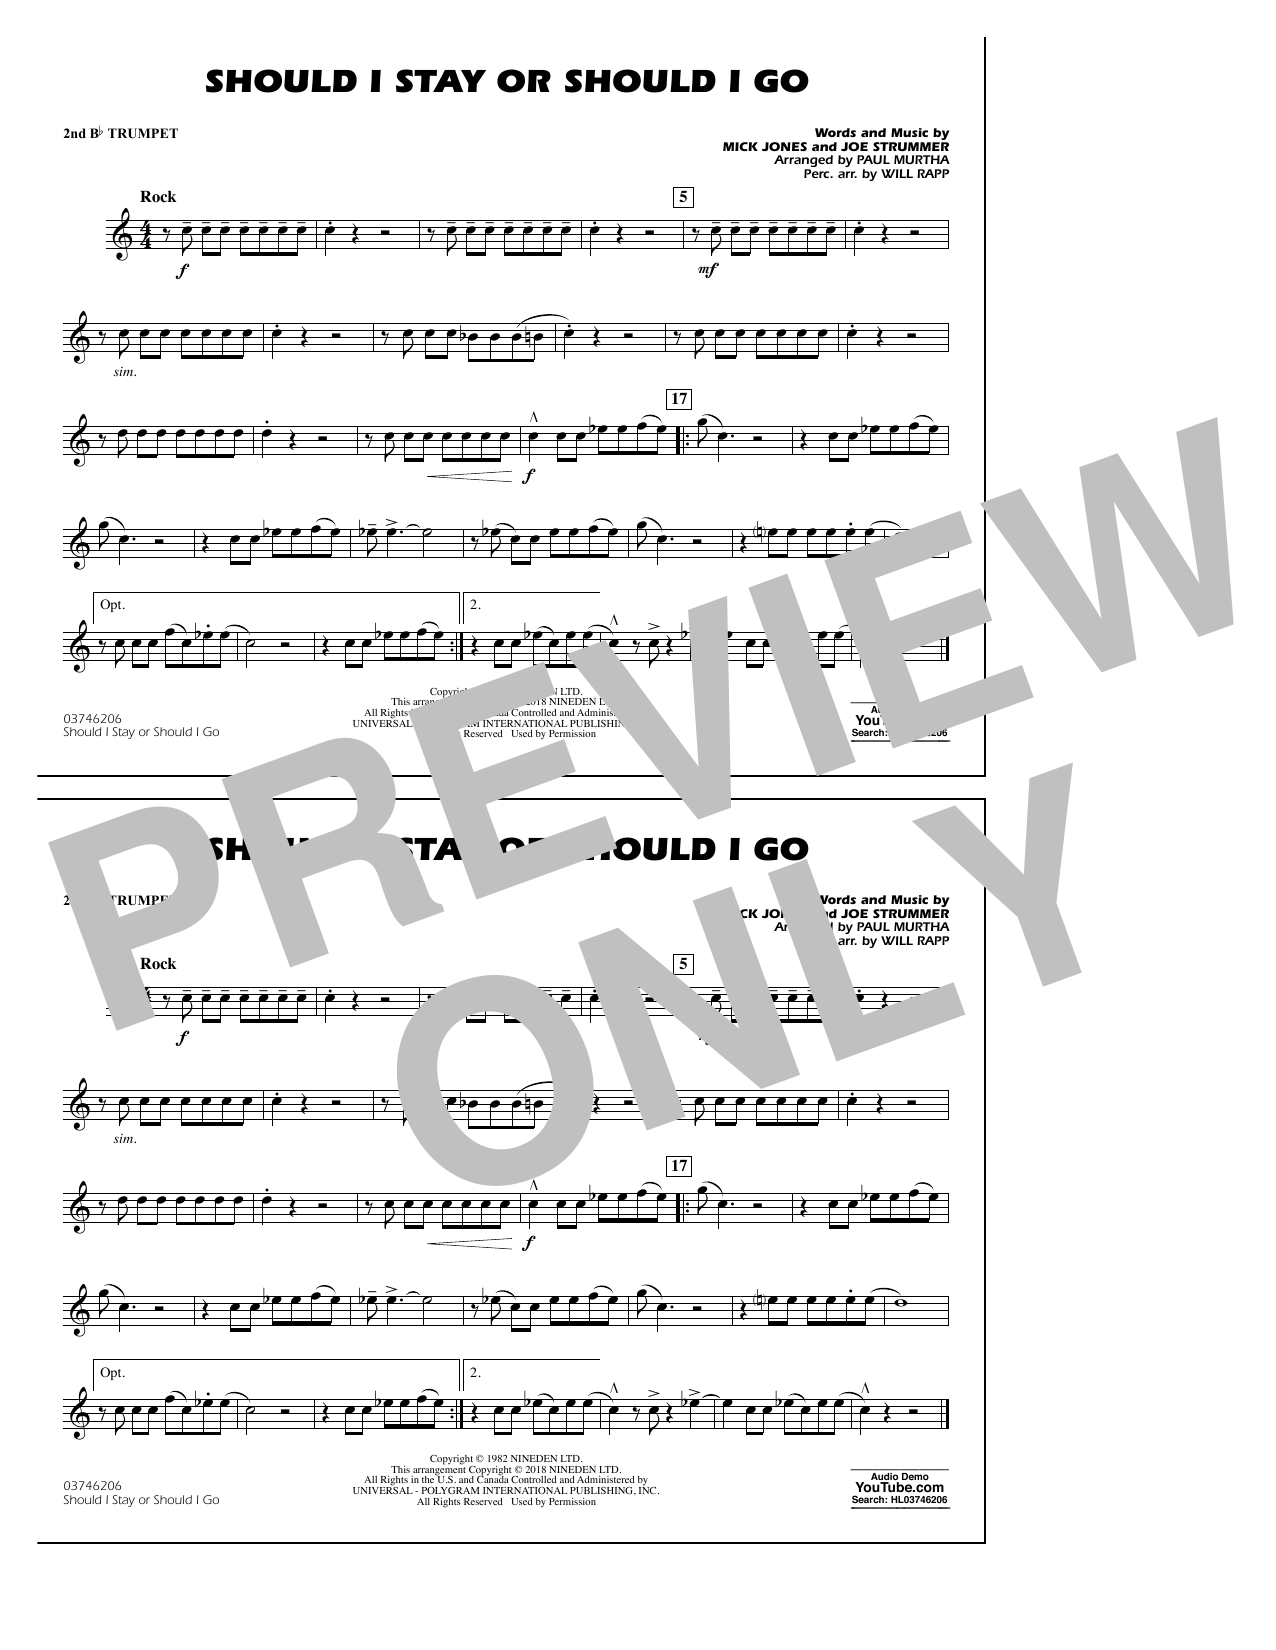 Download Paul Murtha Should I Stay Or Should I Go - 2nd Bb T Sheet Music